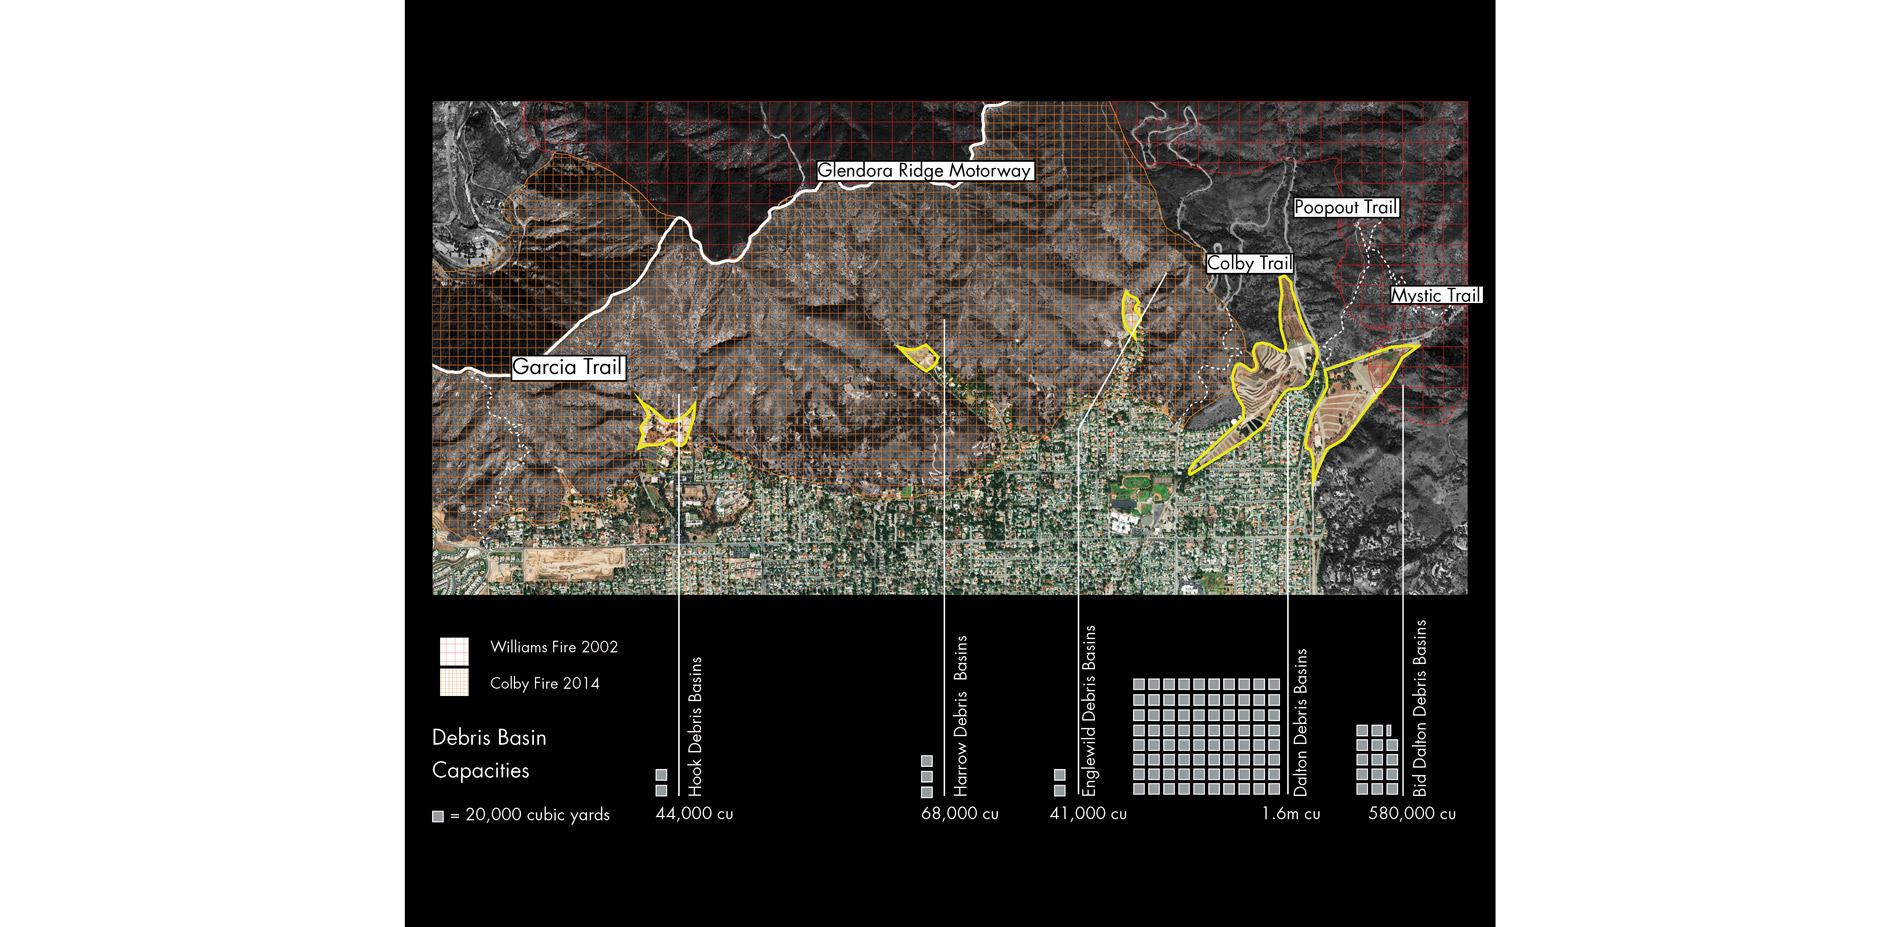 Fire roads and debris basins are the cornerstones of fire infrastructure in the foothills. In Glendora, they correlate to recreational trails within t…